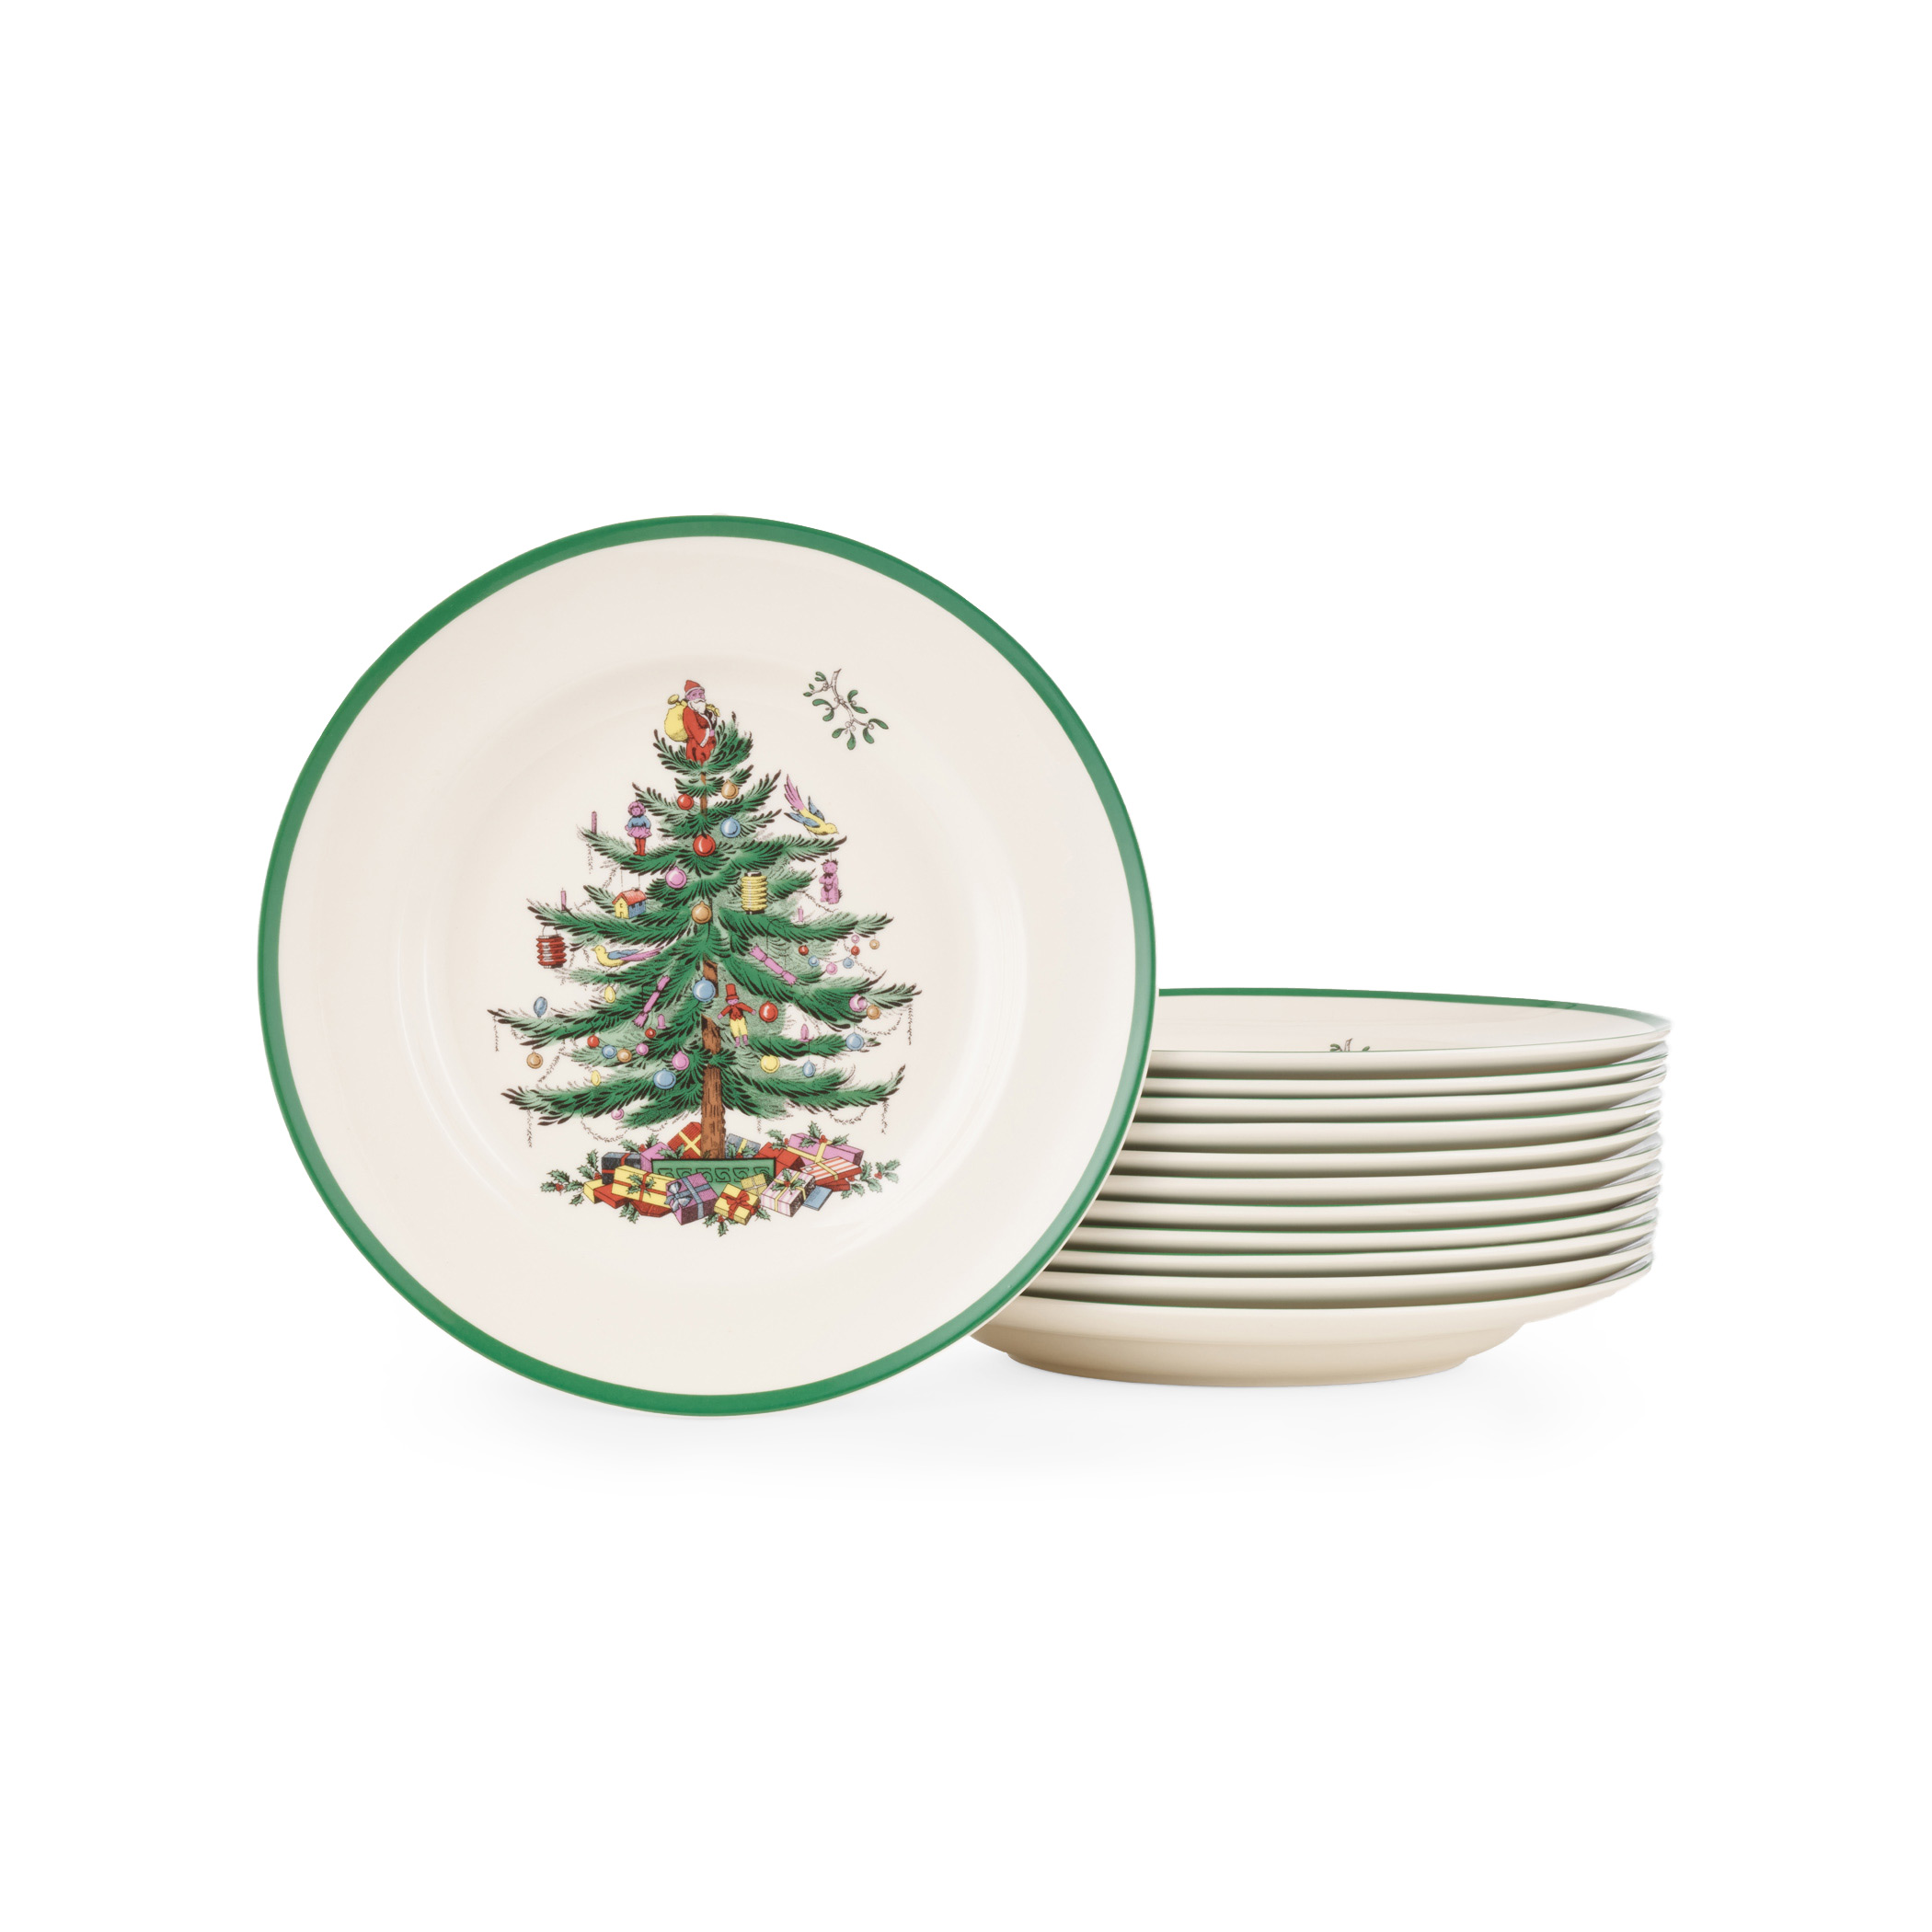 Spode Christmas Plates Add Charm to Your Holiday Table Setting